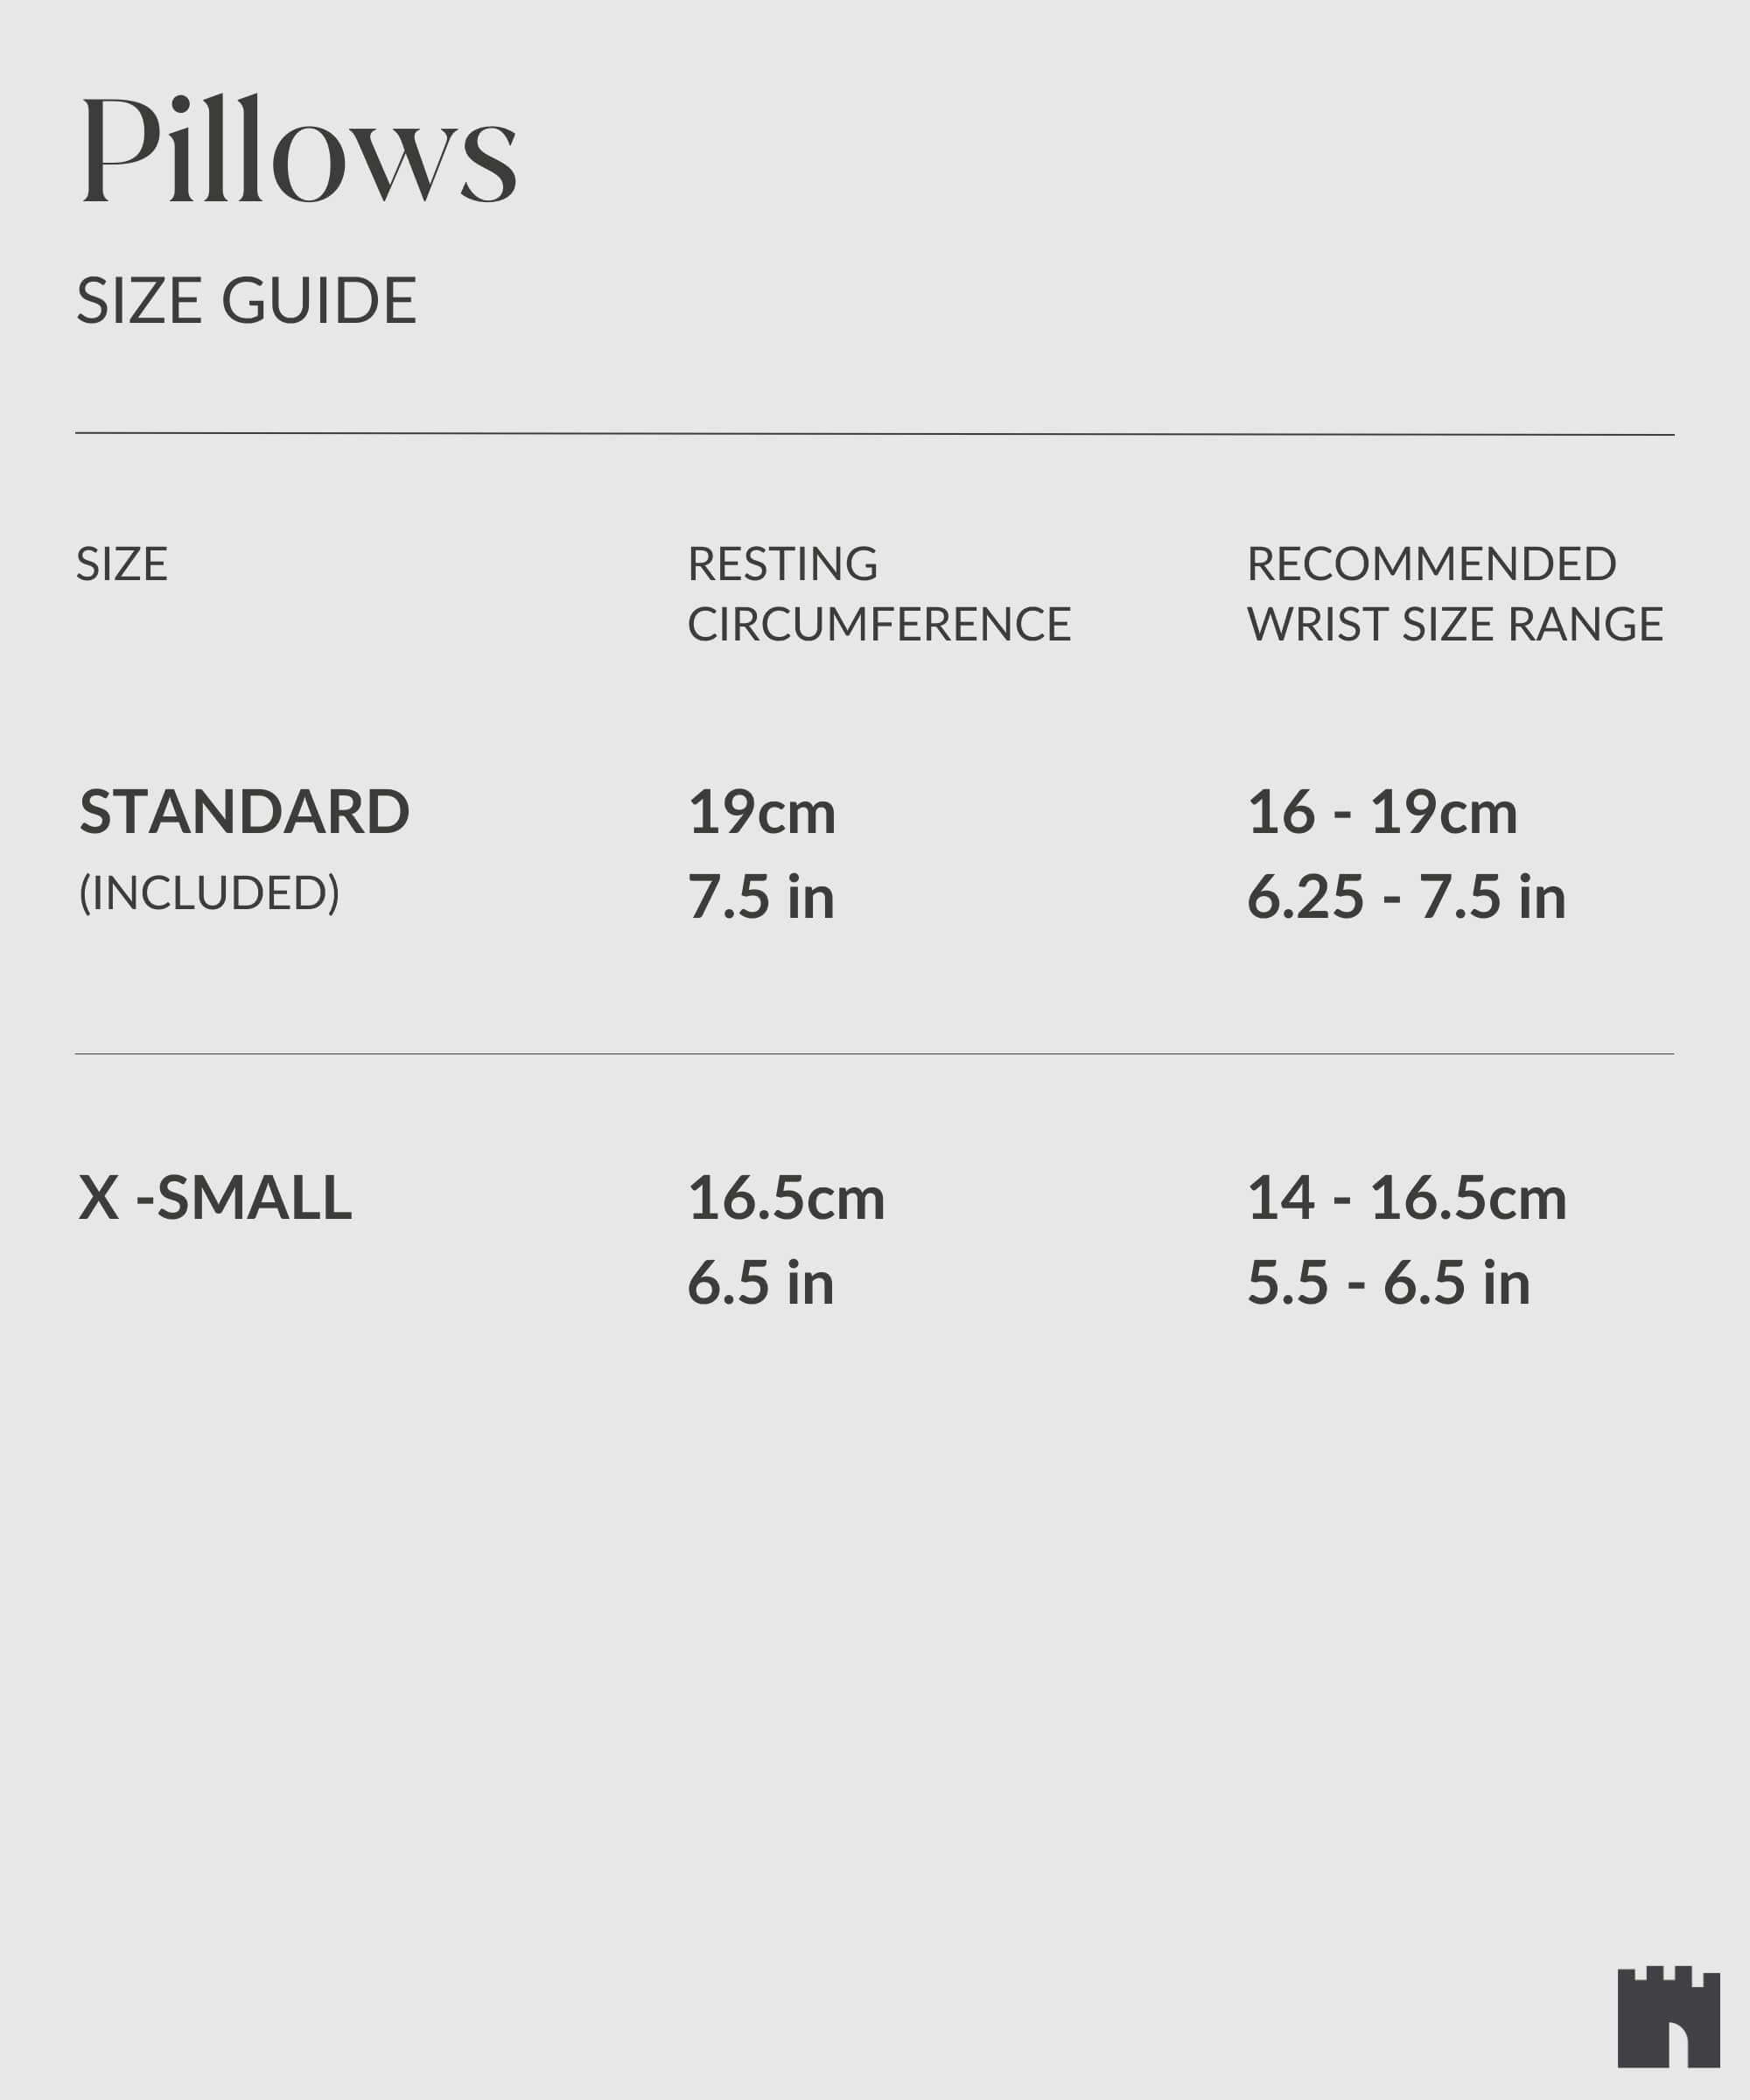 Size chart for pillows outlining different dimensions for standard and x-small sizes, including resting circumference and recommended wrist size range within the TAWBURY Fraser 3 Watch Travel Case with Storage - Black range.